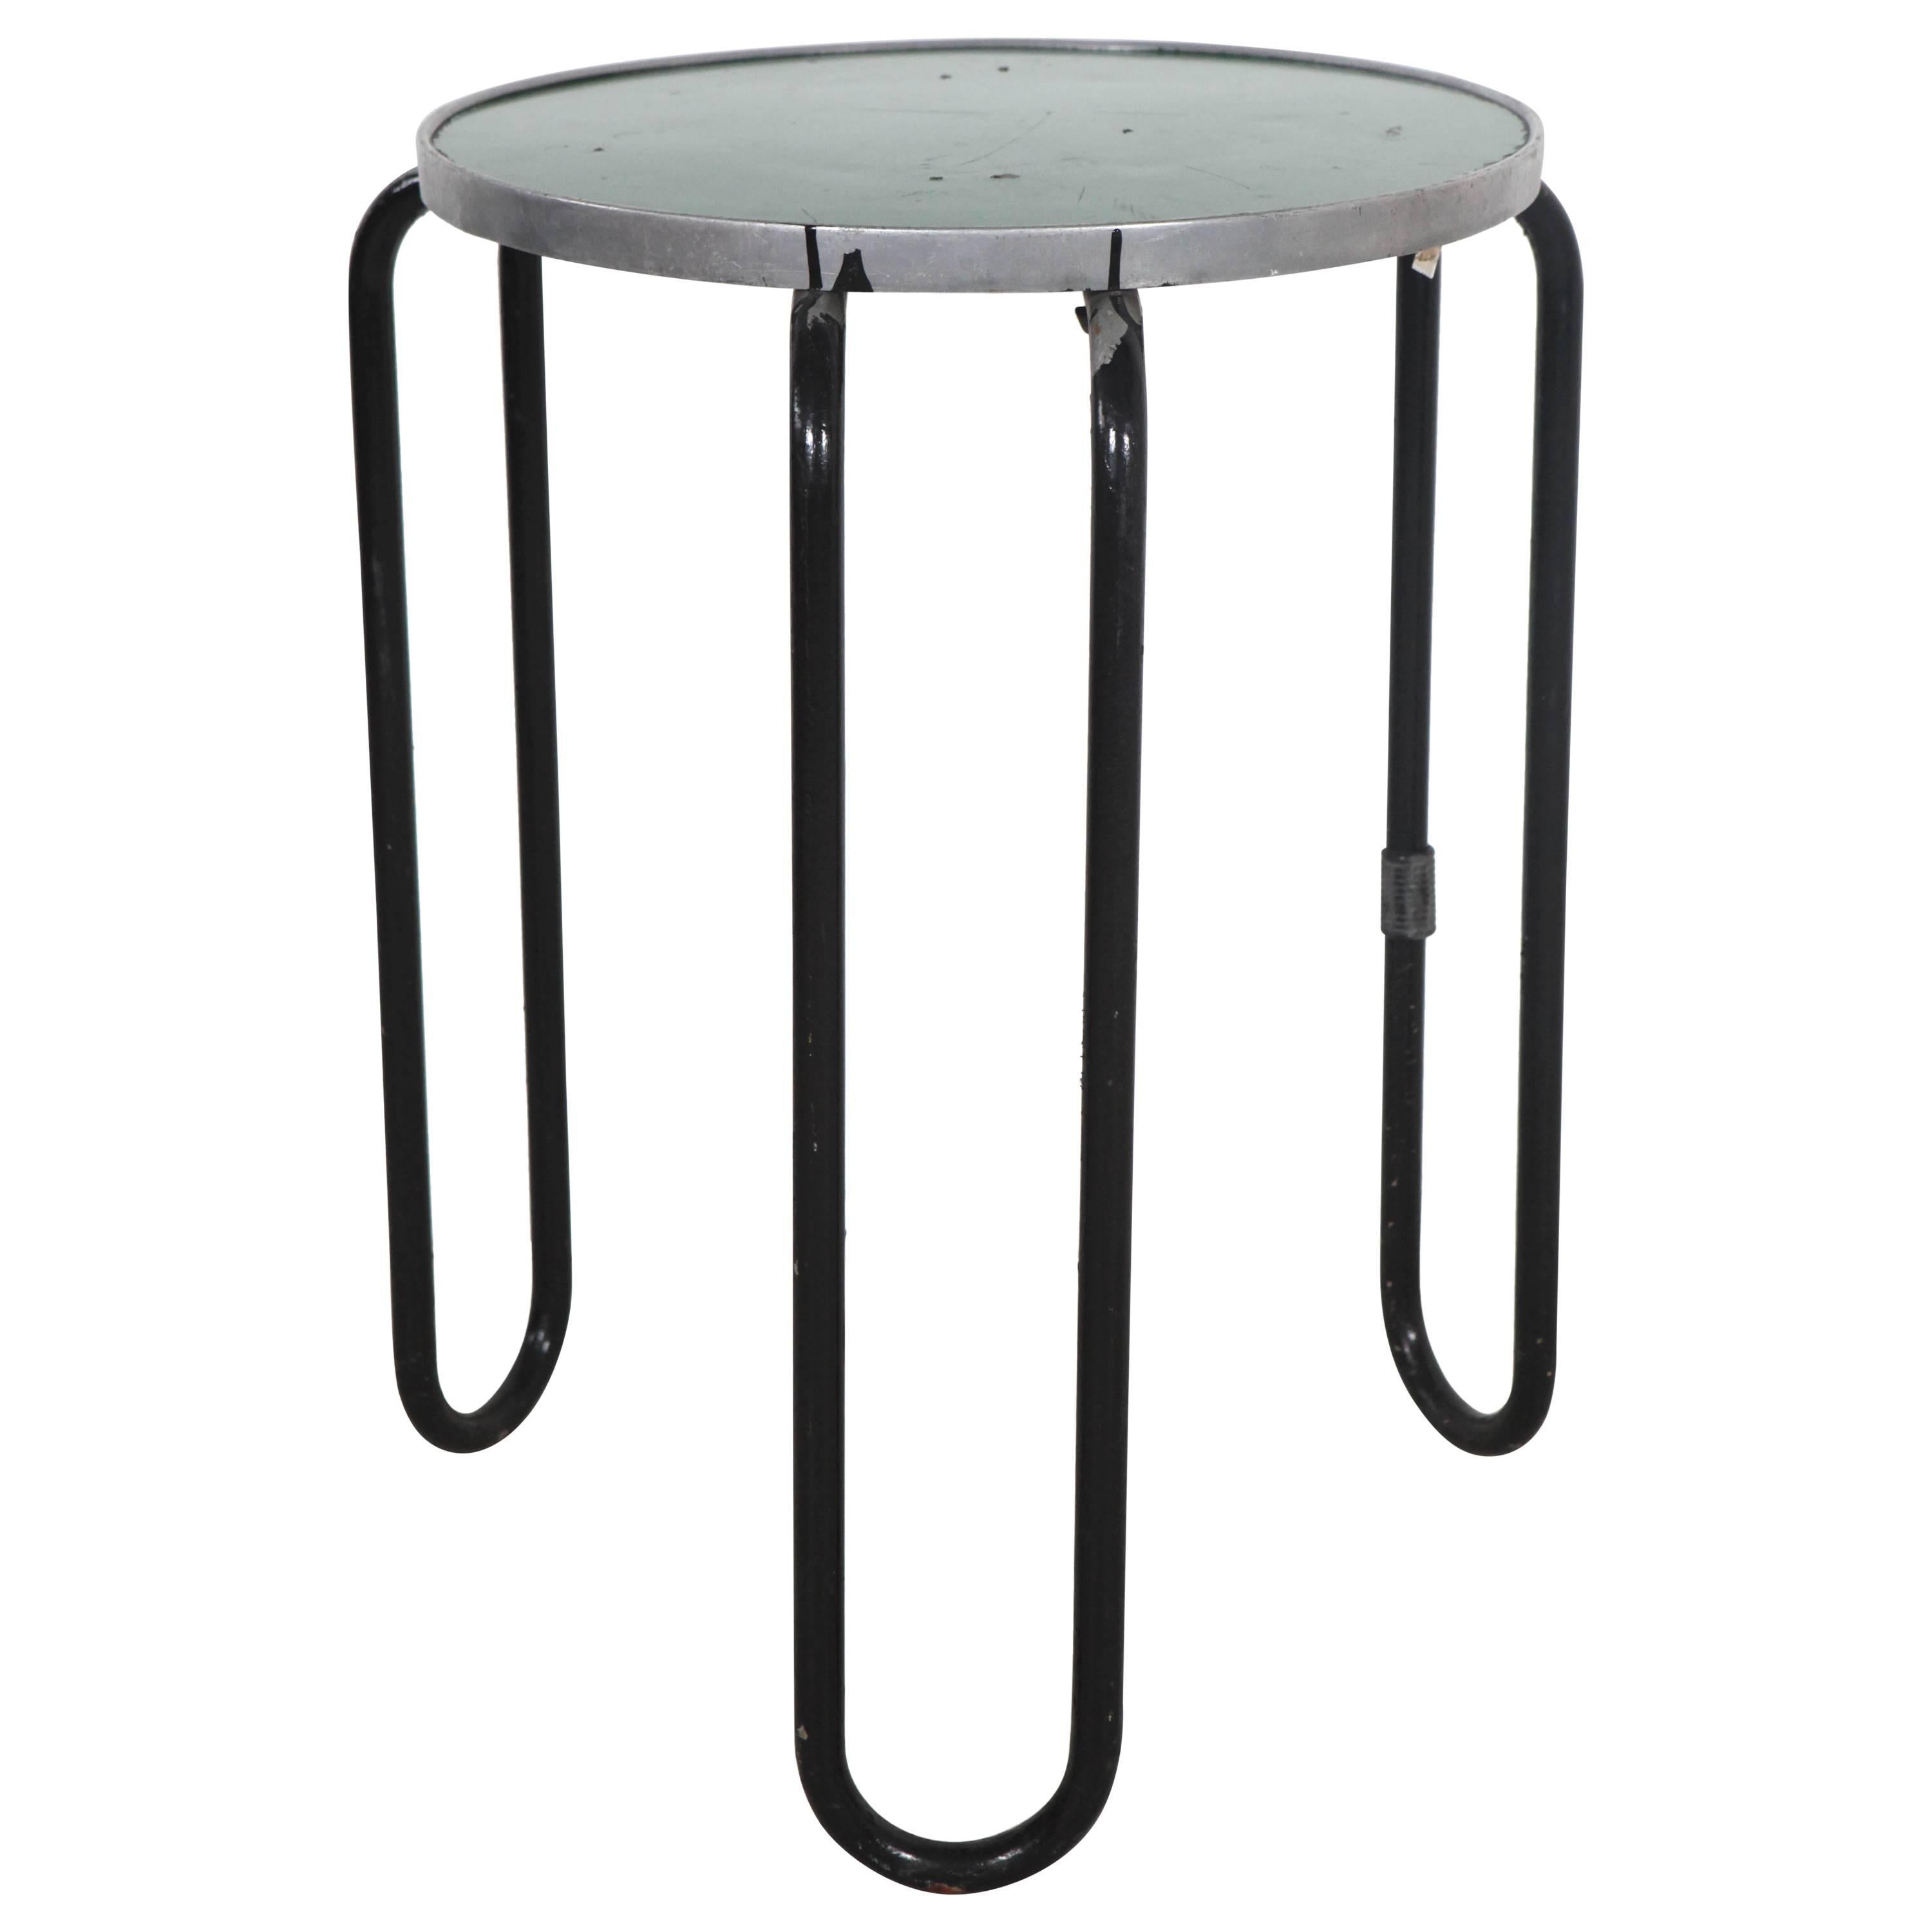 Vintage Italian Curved Metal Round Tall Occasional or Side Table